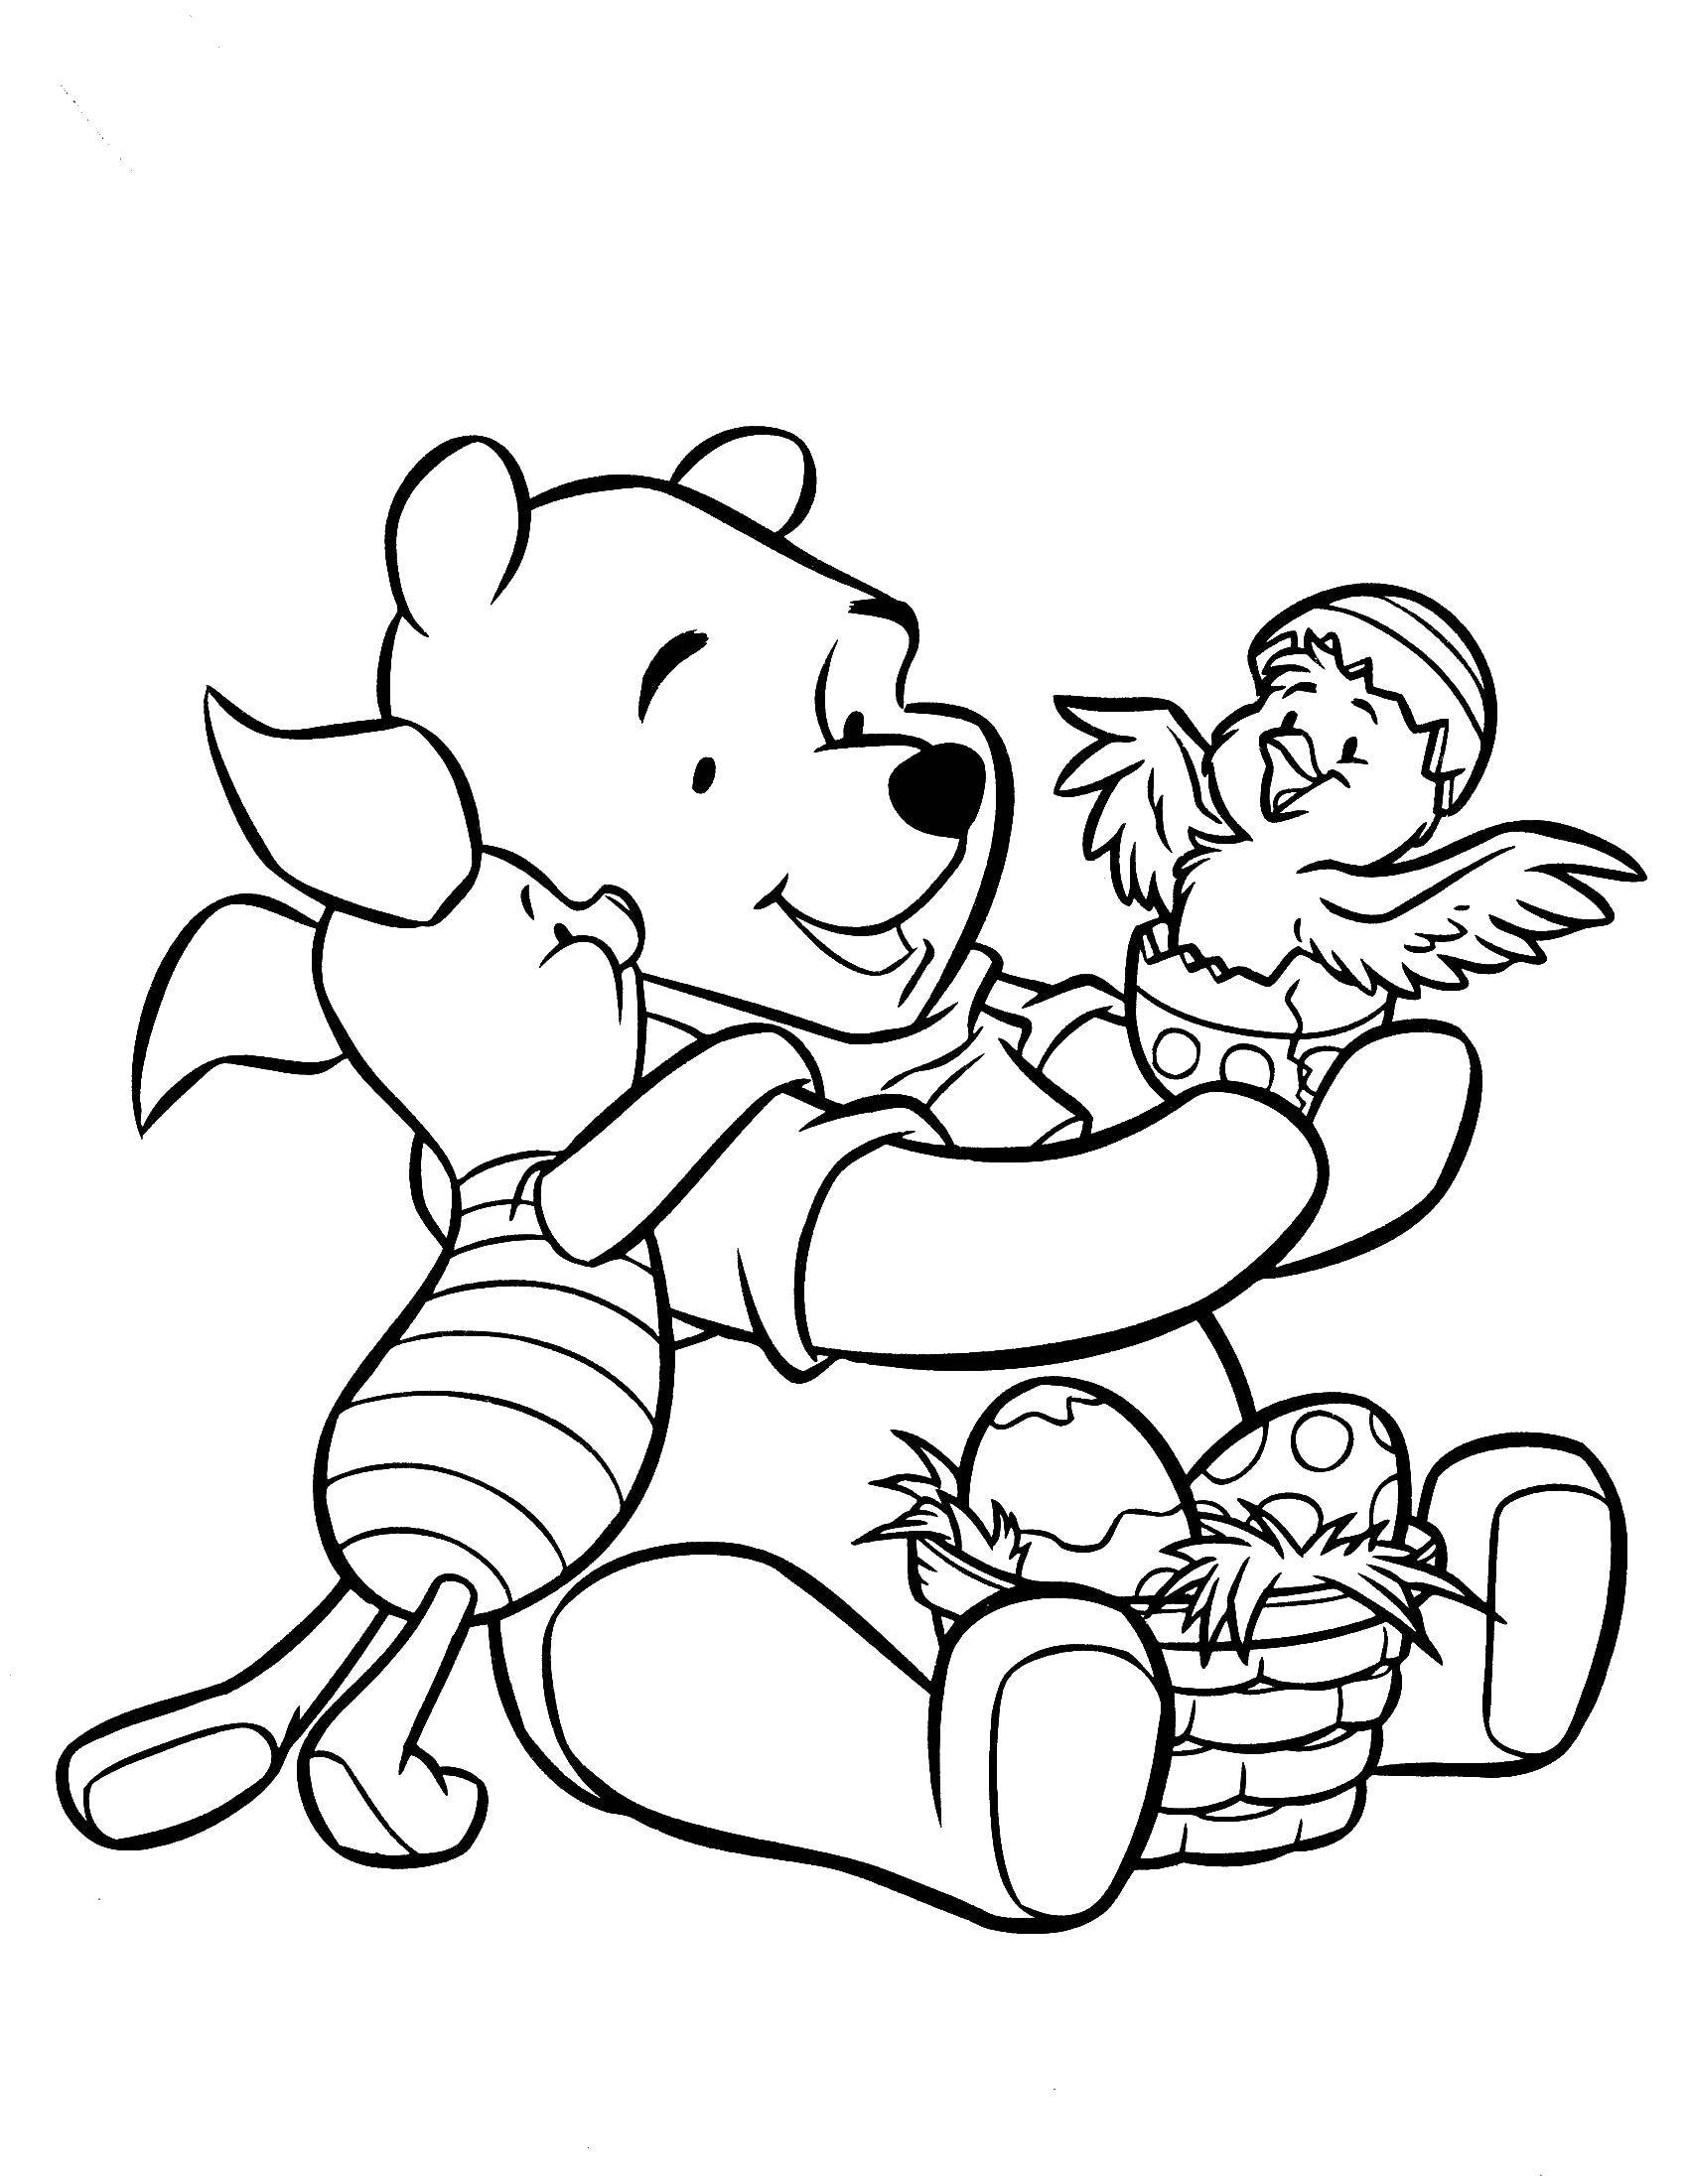 Coloring Winnie the Pooh and heels with a chick. Category Disney cartoons. Tags:  Disney honey, Winnie the Pooh, Piglet, chick.